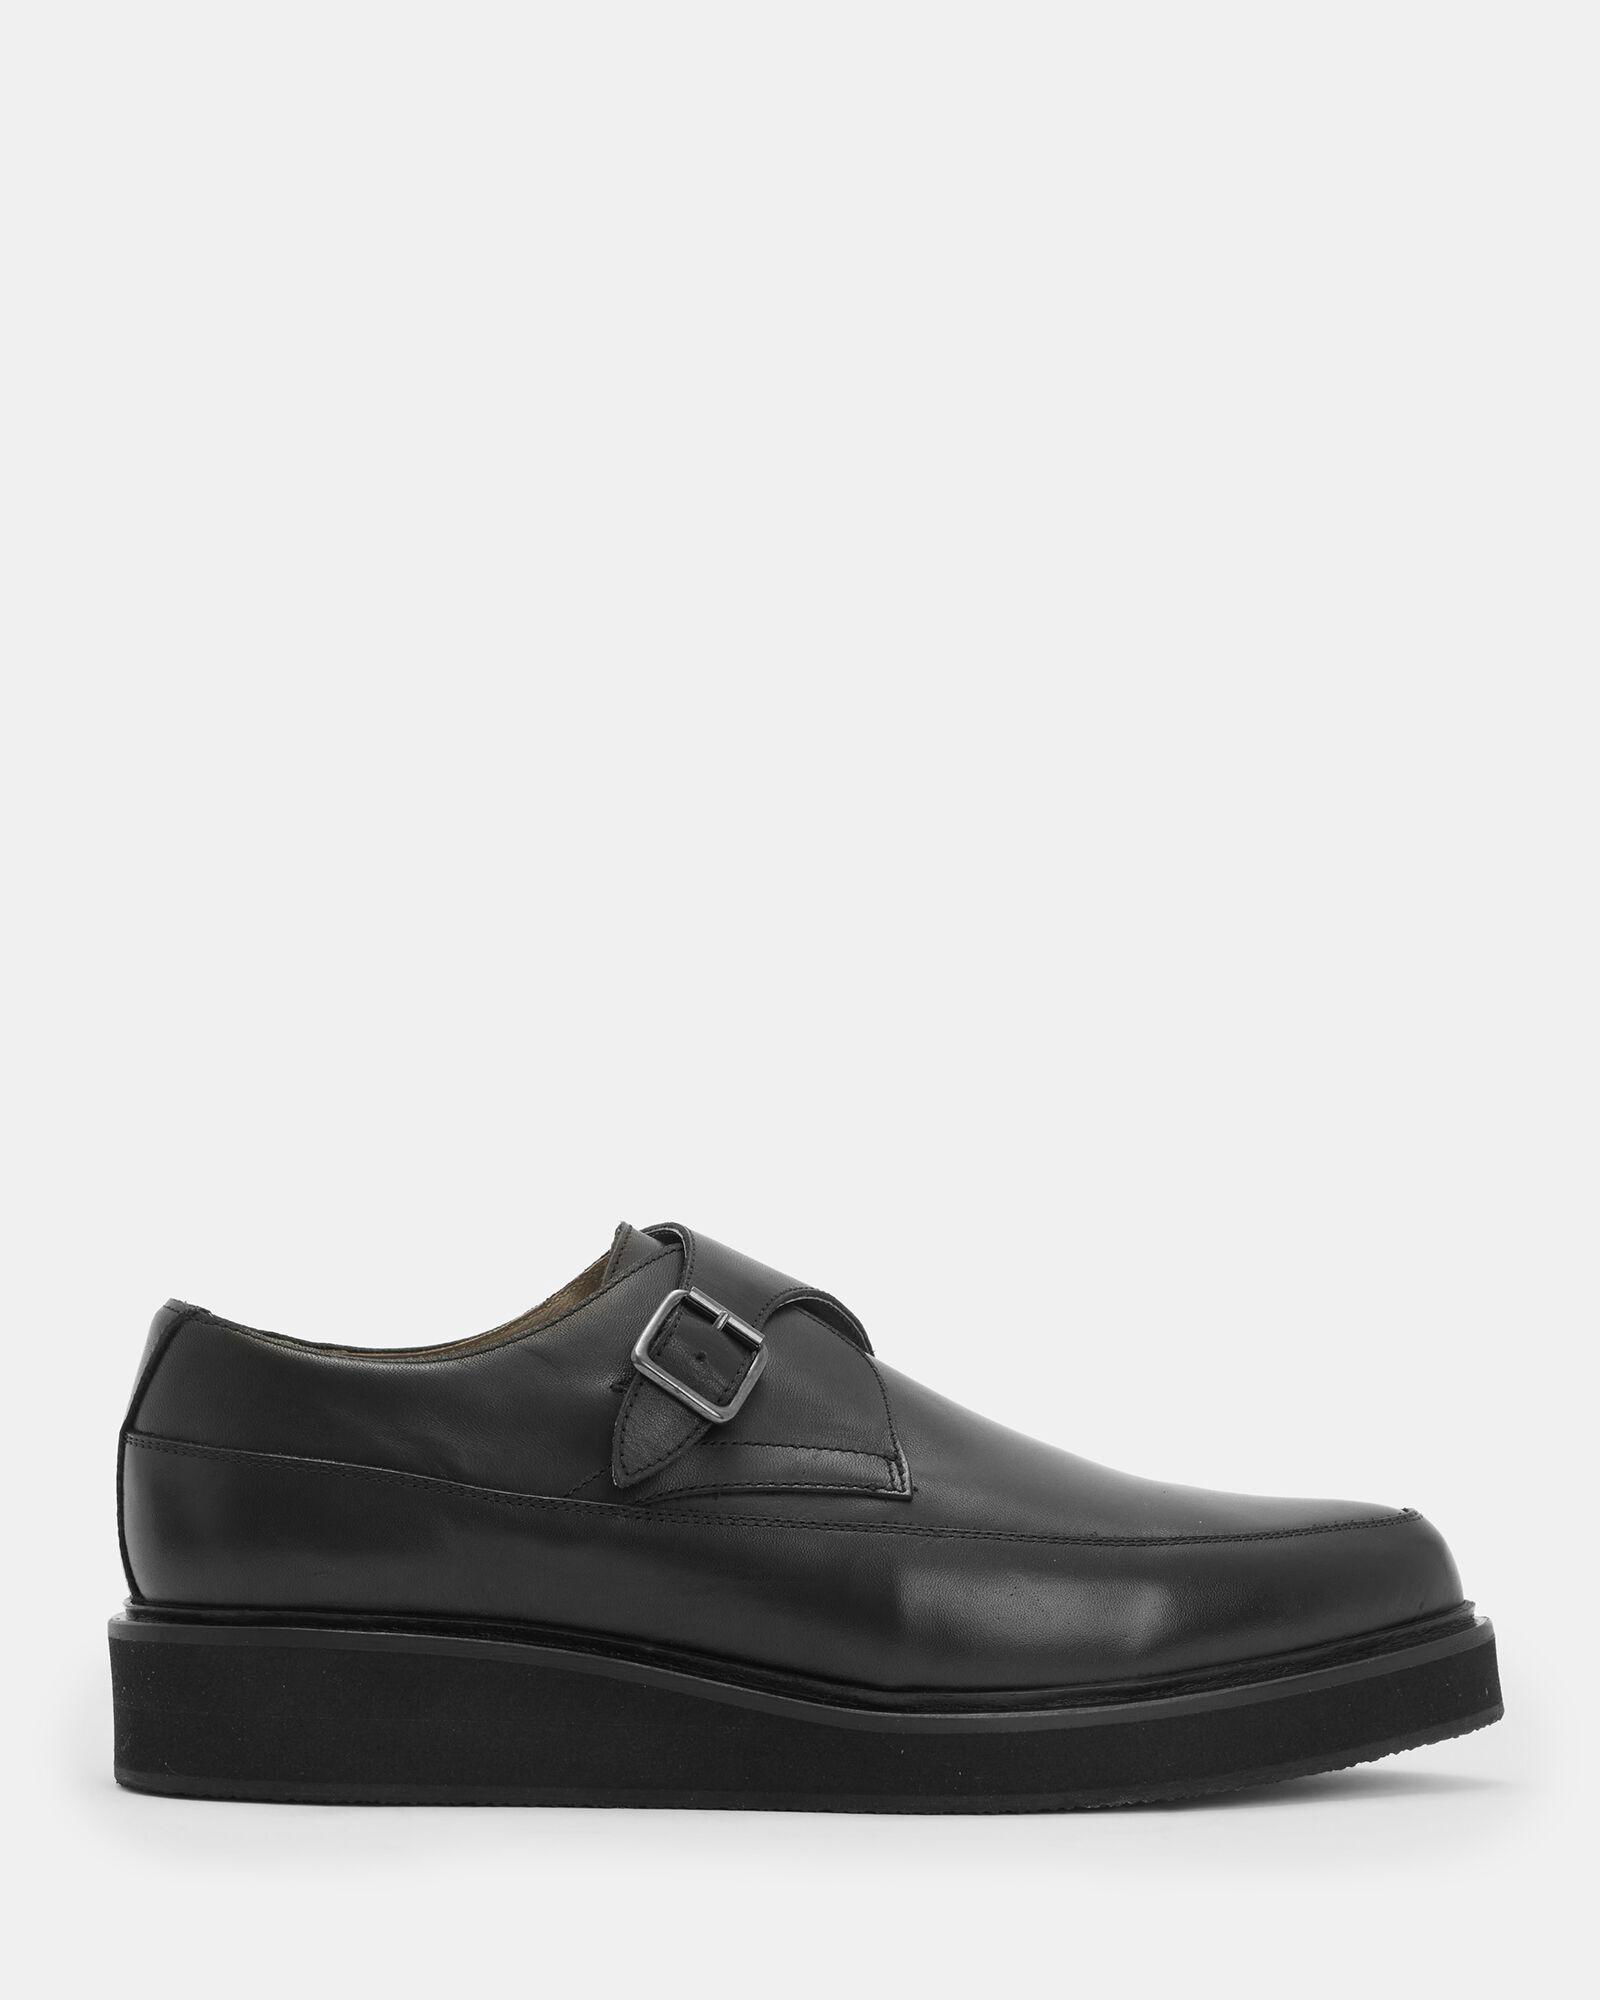 Luke Leather Creeper Shoes by ALLSAINTS